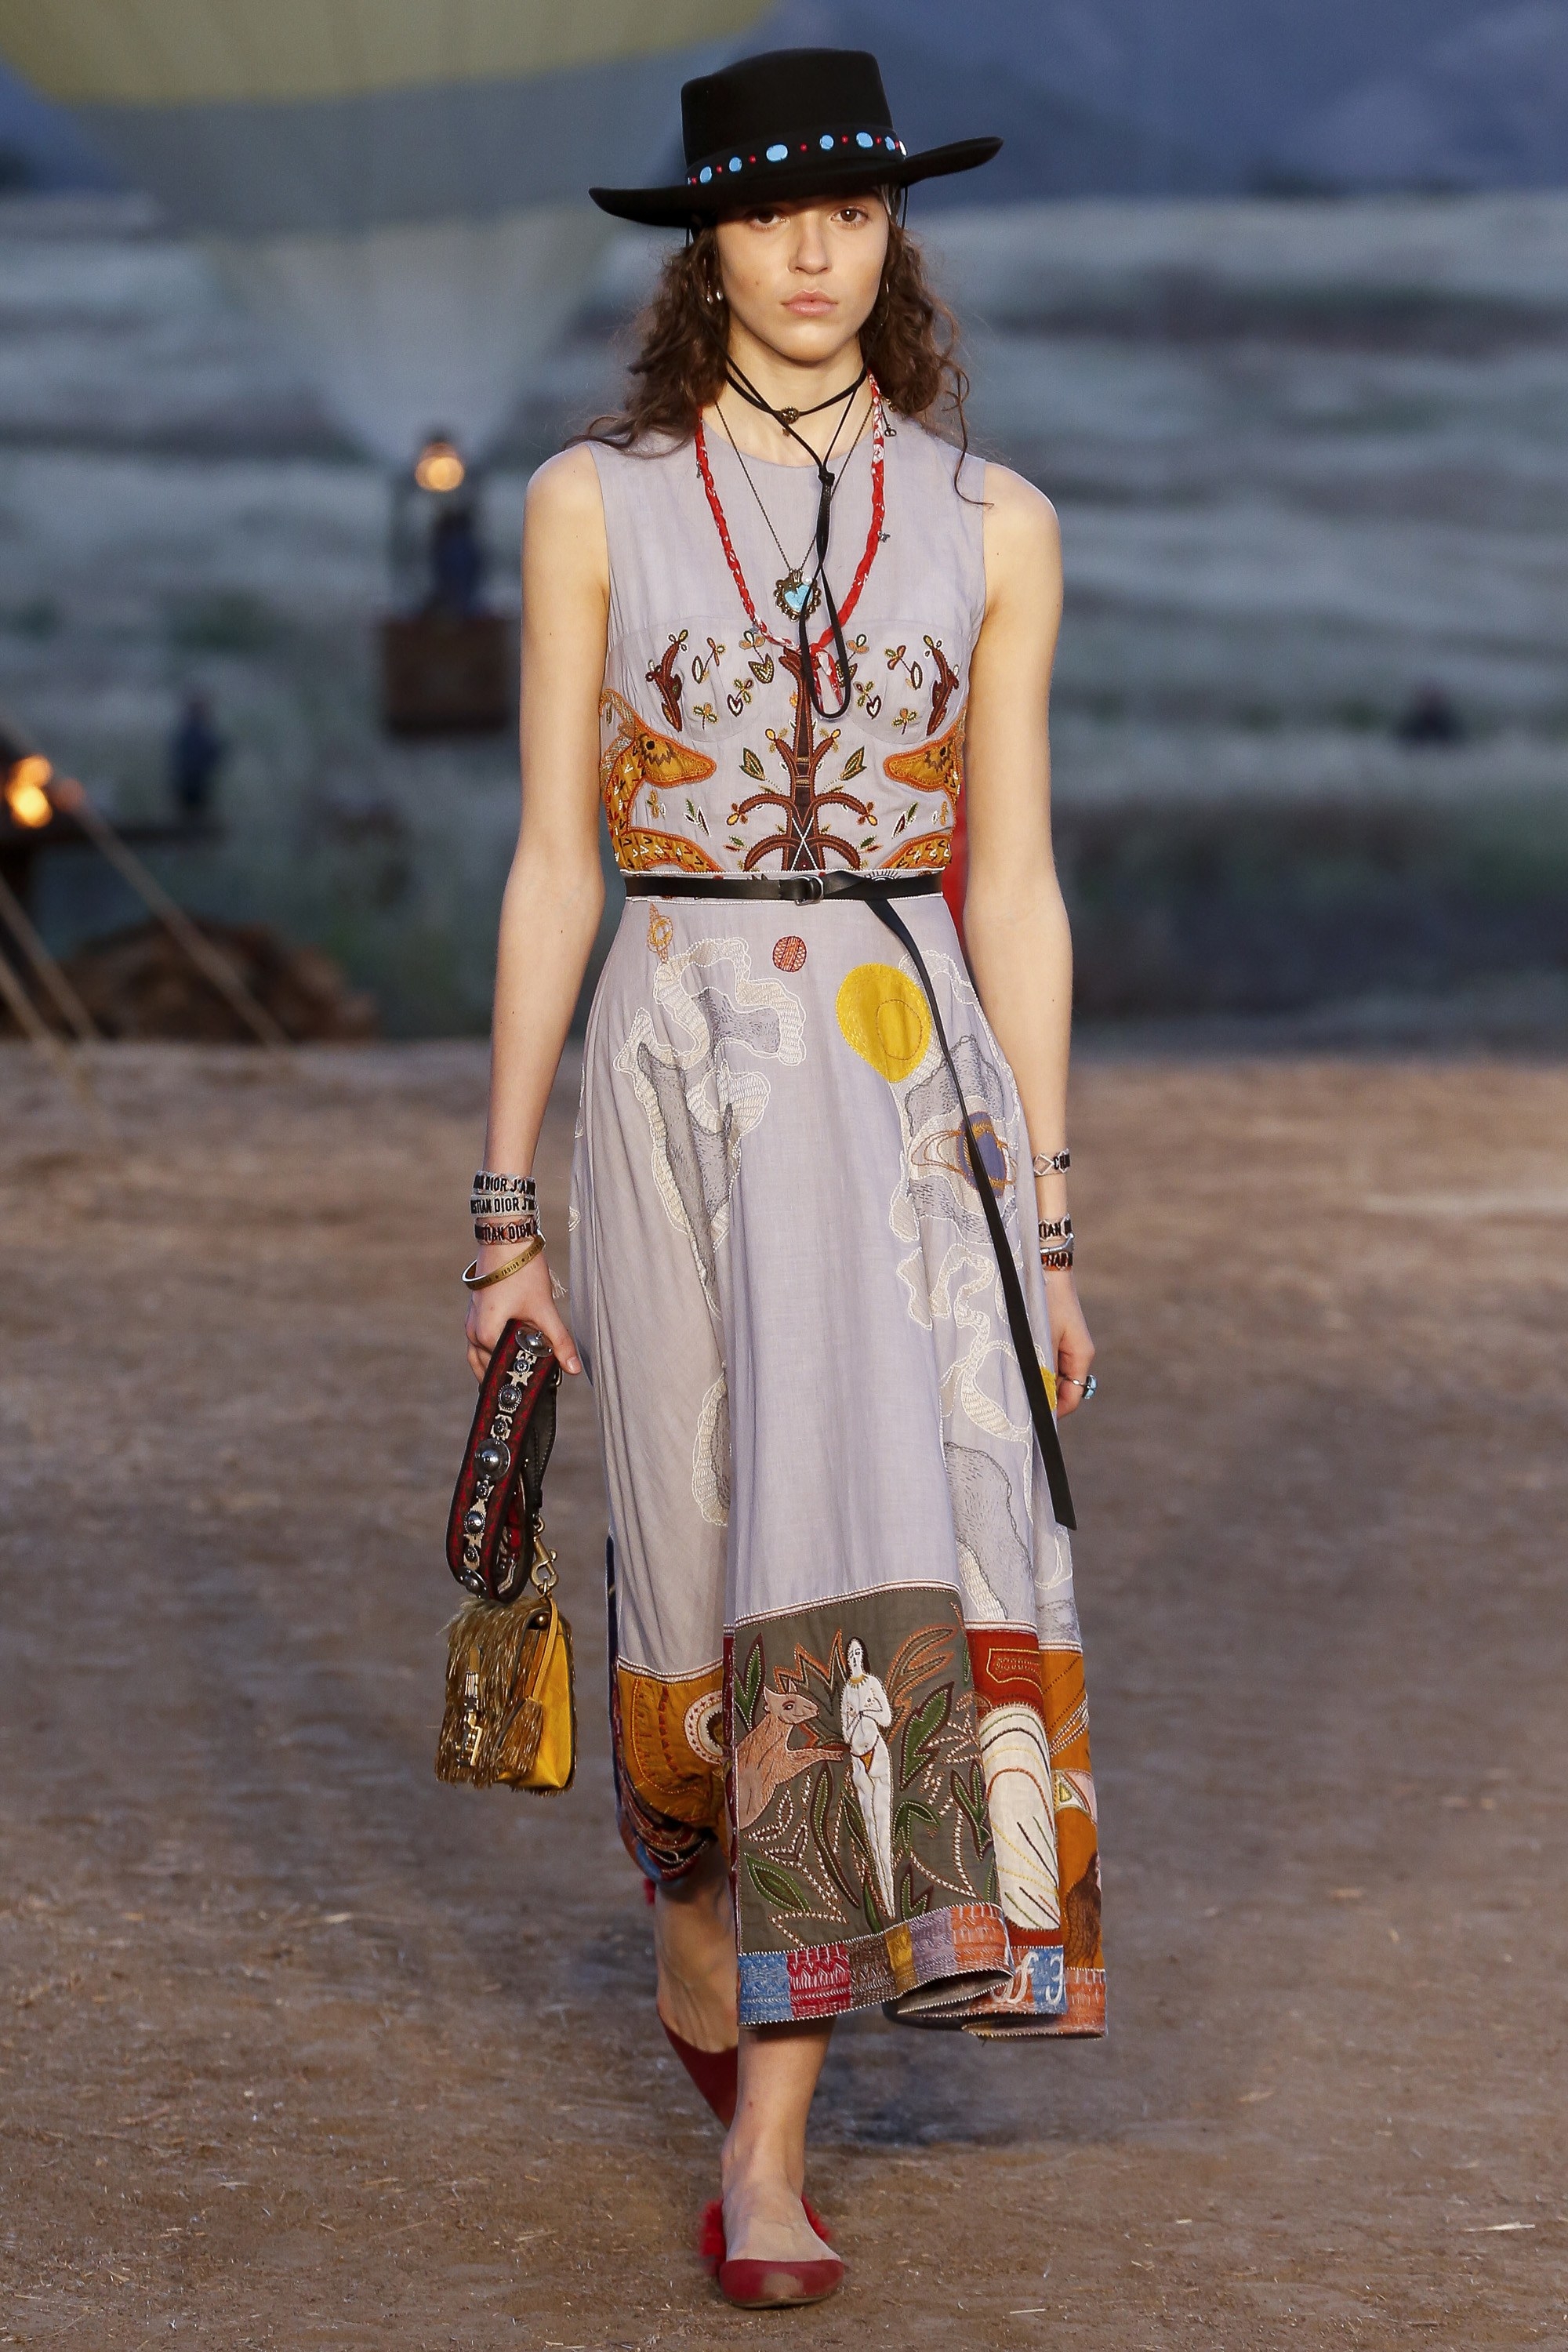 Dior in the Desert! Photos from Christian Dior Cruise 2018 Runway Show